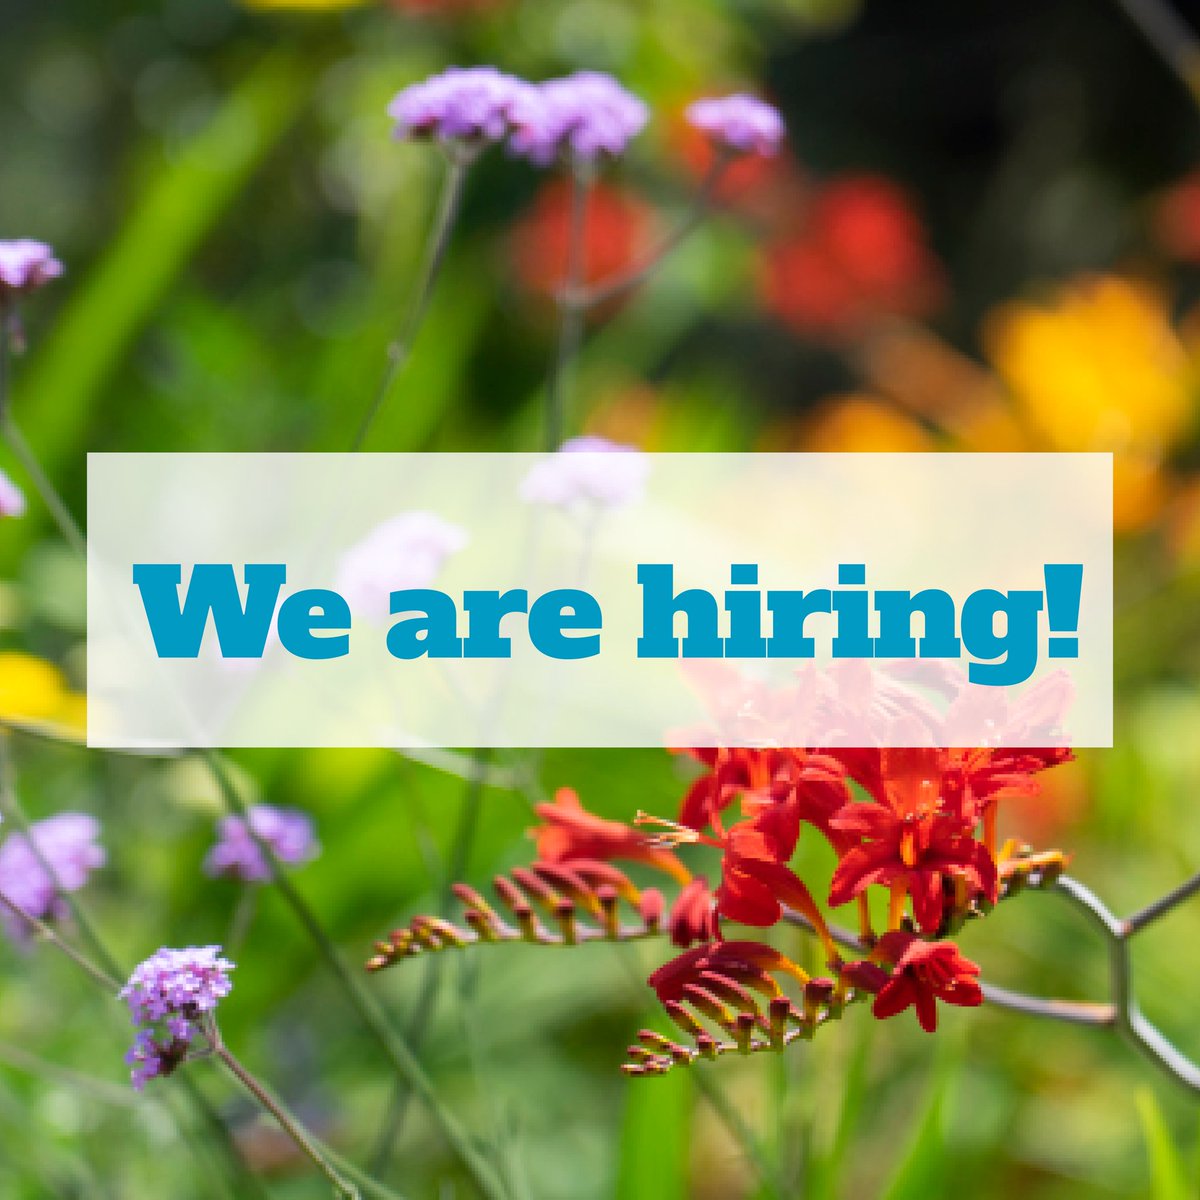 We're on the lookout for a Communications Manager to join our team - someone who’s passionate about making a difference to children, adults and their families in the local community. Could this be you? Find out more at bit.ly/42zL28N